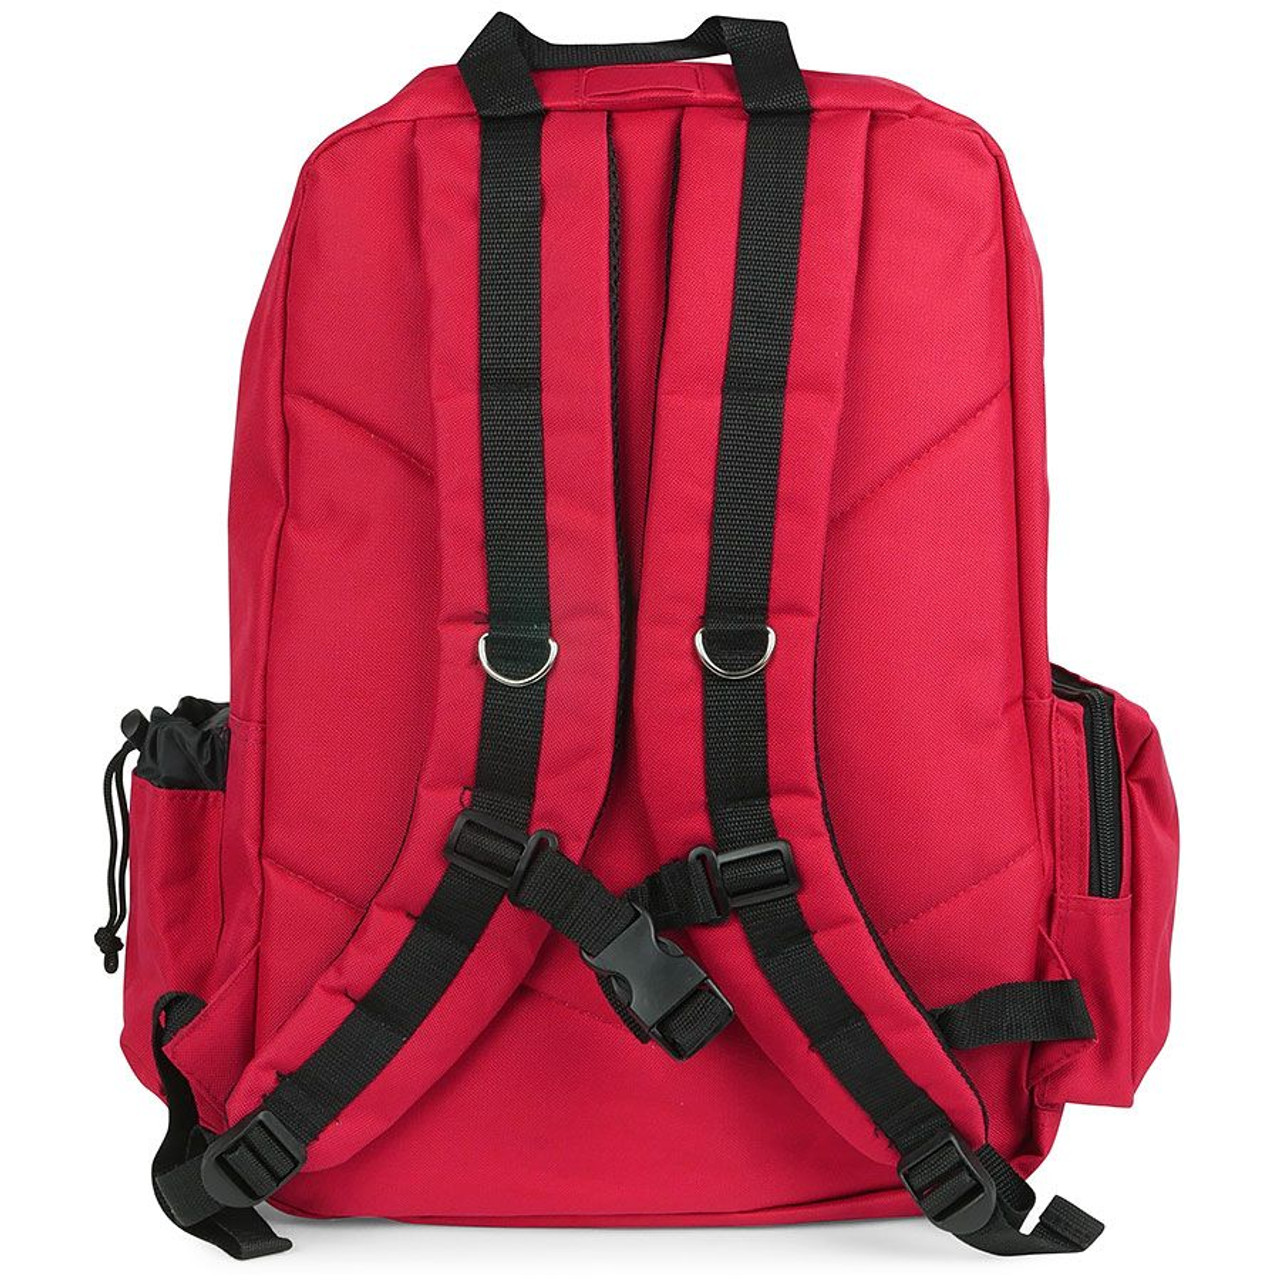 - Medical Reponder Bags, Gear Nylon and - Deluxe - EMT Response Bag Backpack - Red Containers Survival Aid First Emergency Kit Backpacks